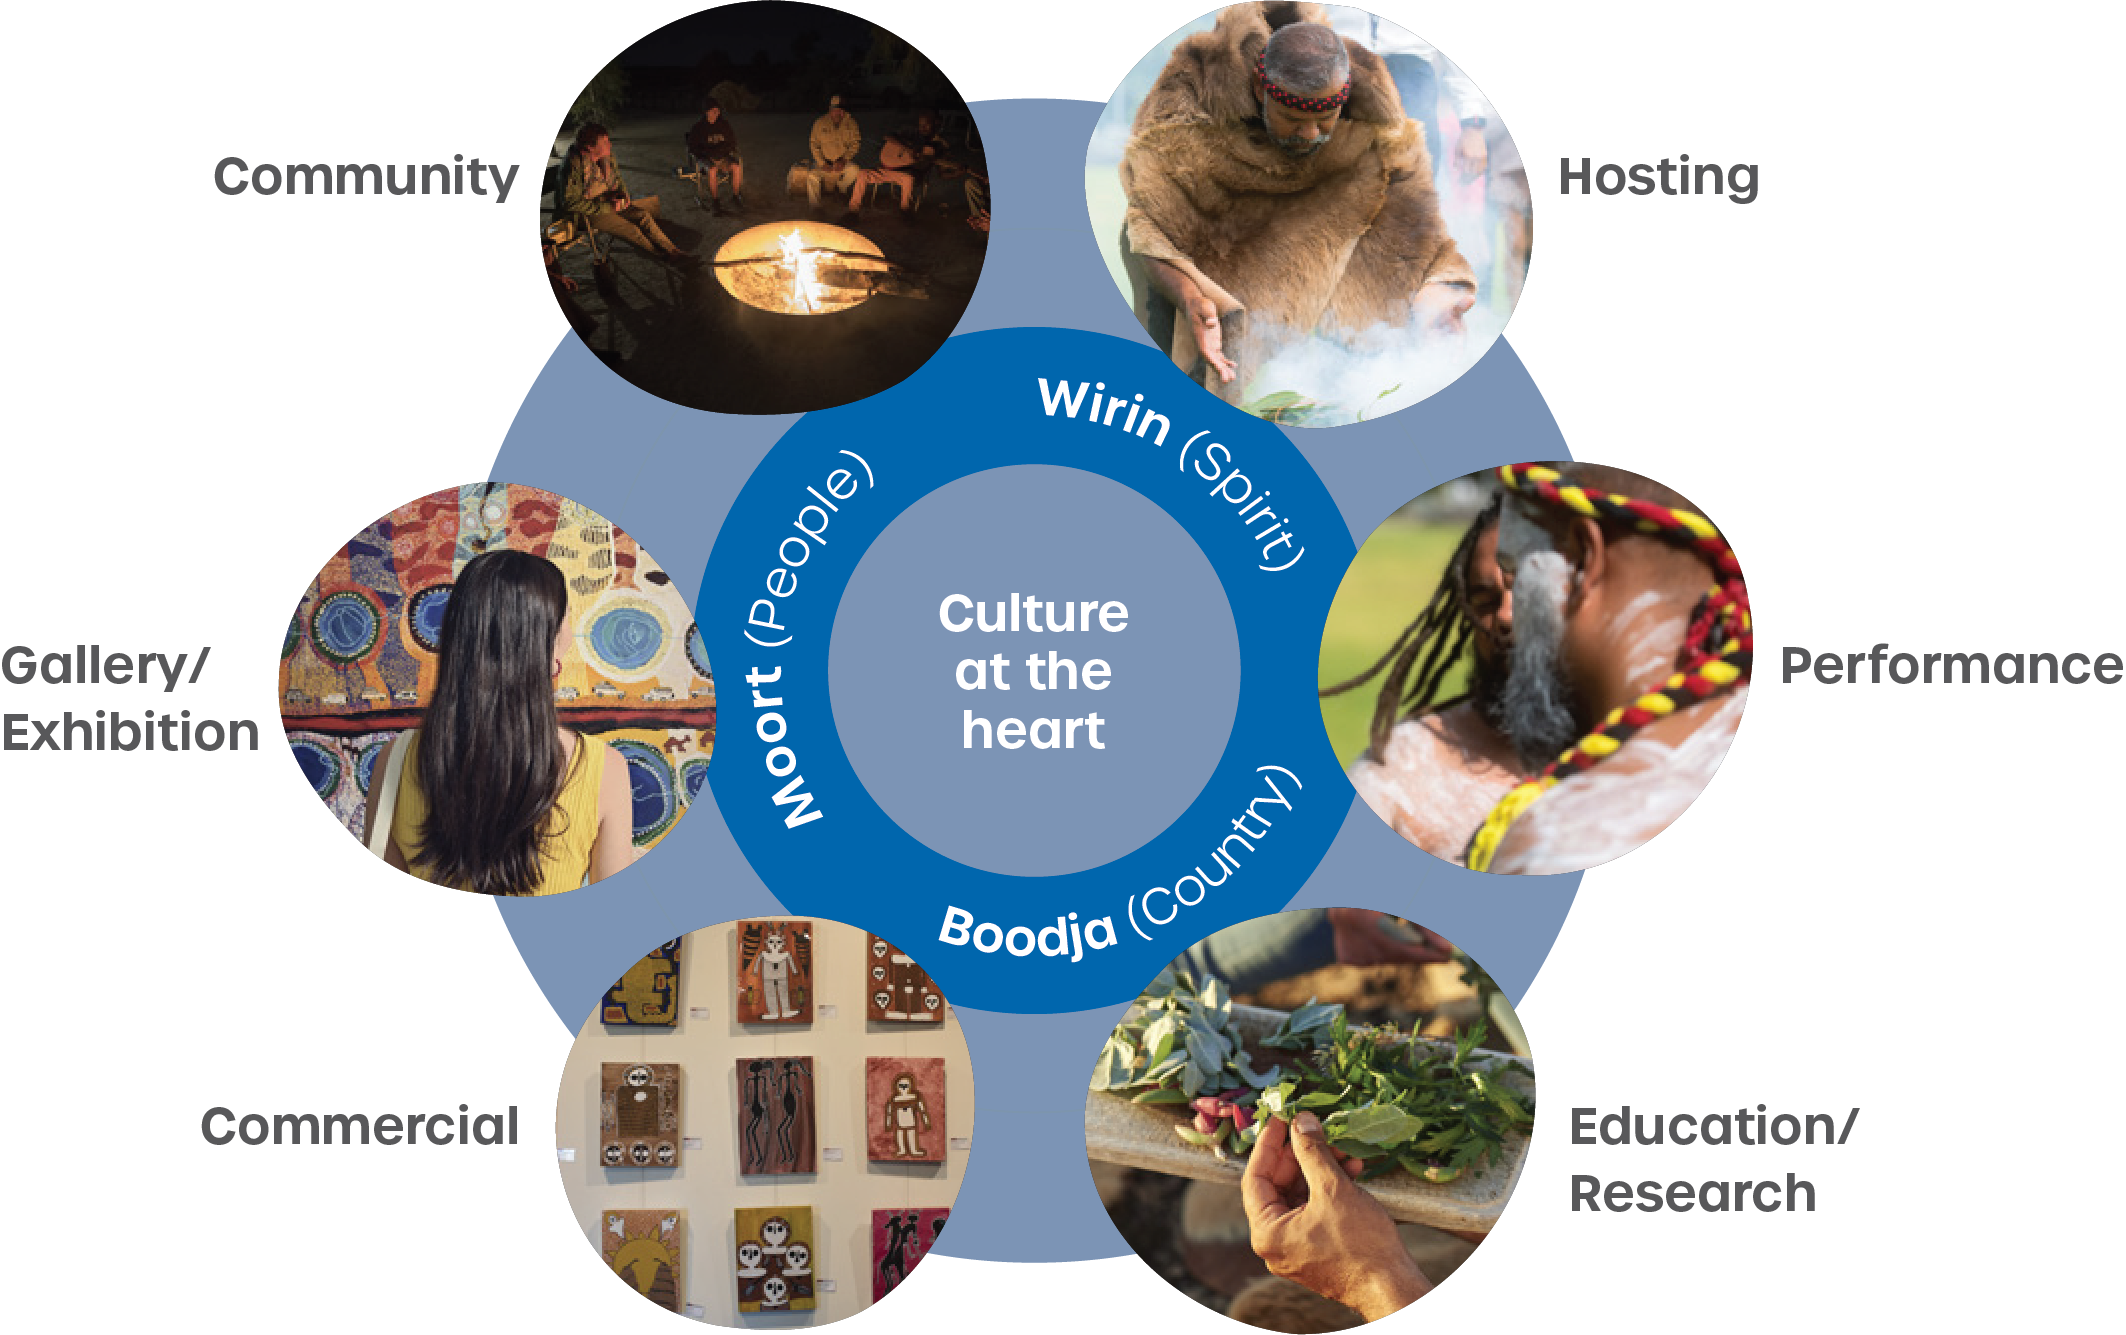 Circlular graphic with 'Cultural at the heart' in the centre, with Wirin (Spirit), Boodja (Country) and Moort (People) around the centre, and hosting, performance, education/research, commercial, gallery/exhibition and community around the outer circle.